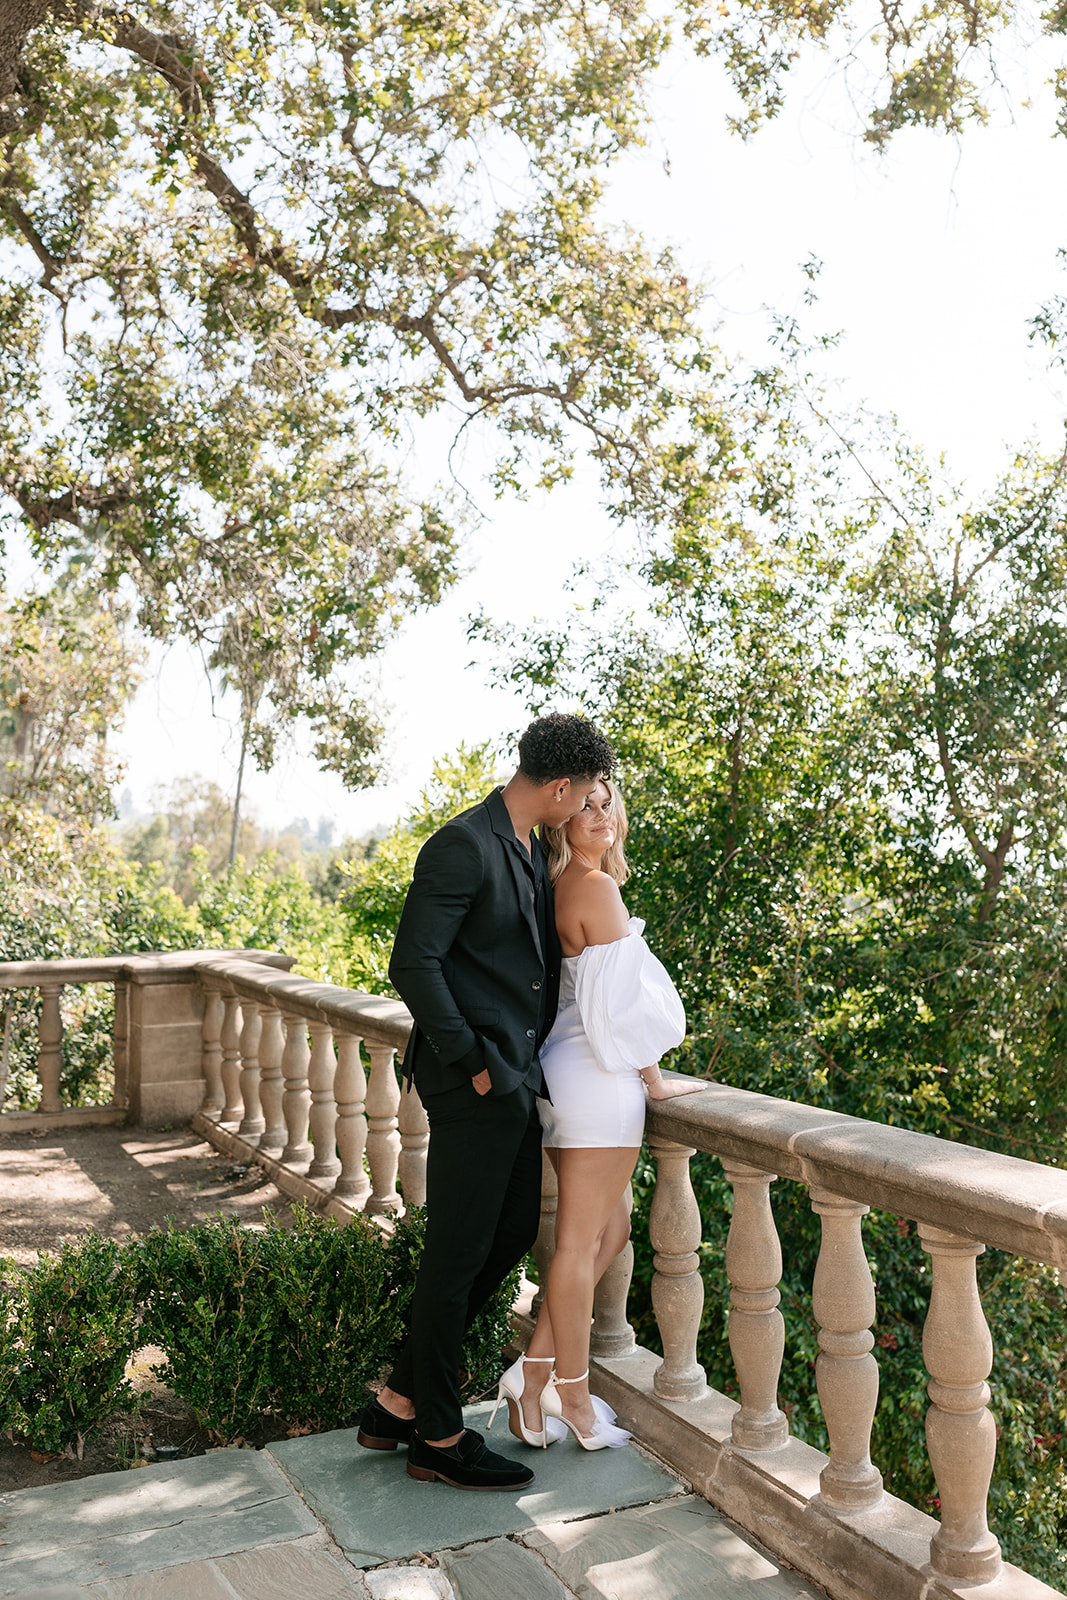 greystone mansion beverly hills los angeles southern california engagement best photoshoot locations california beaches